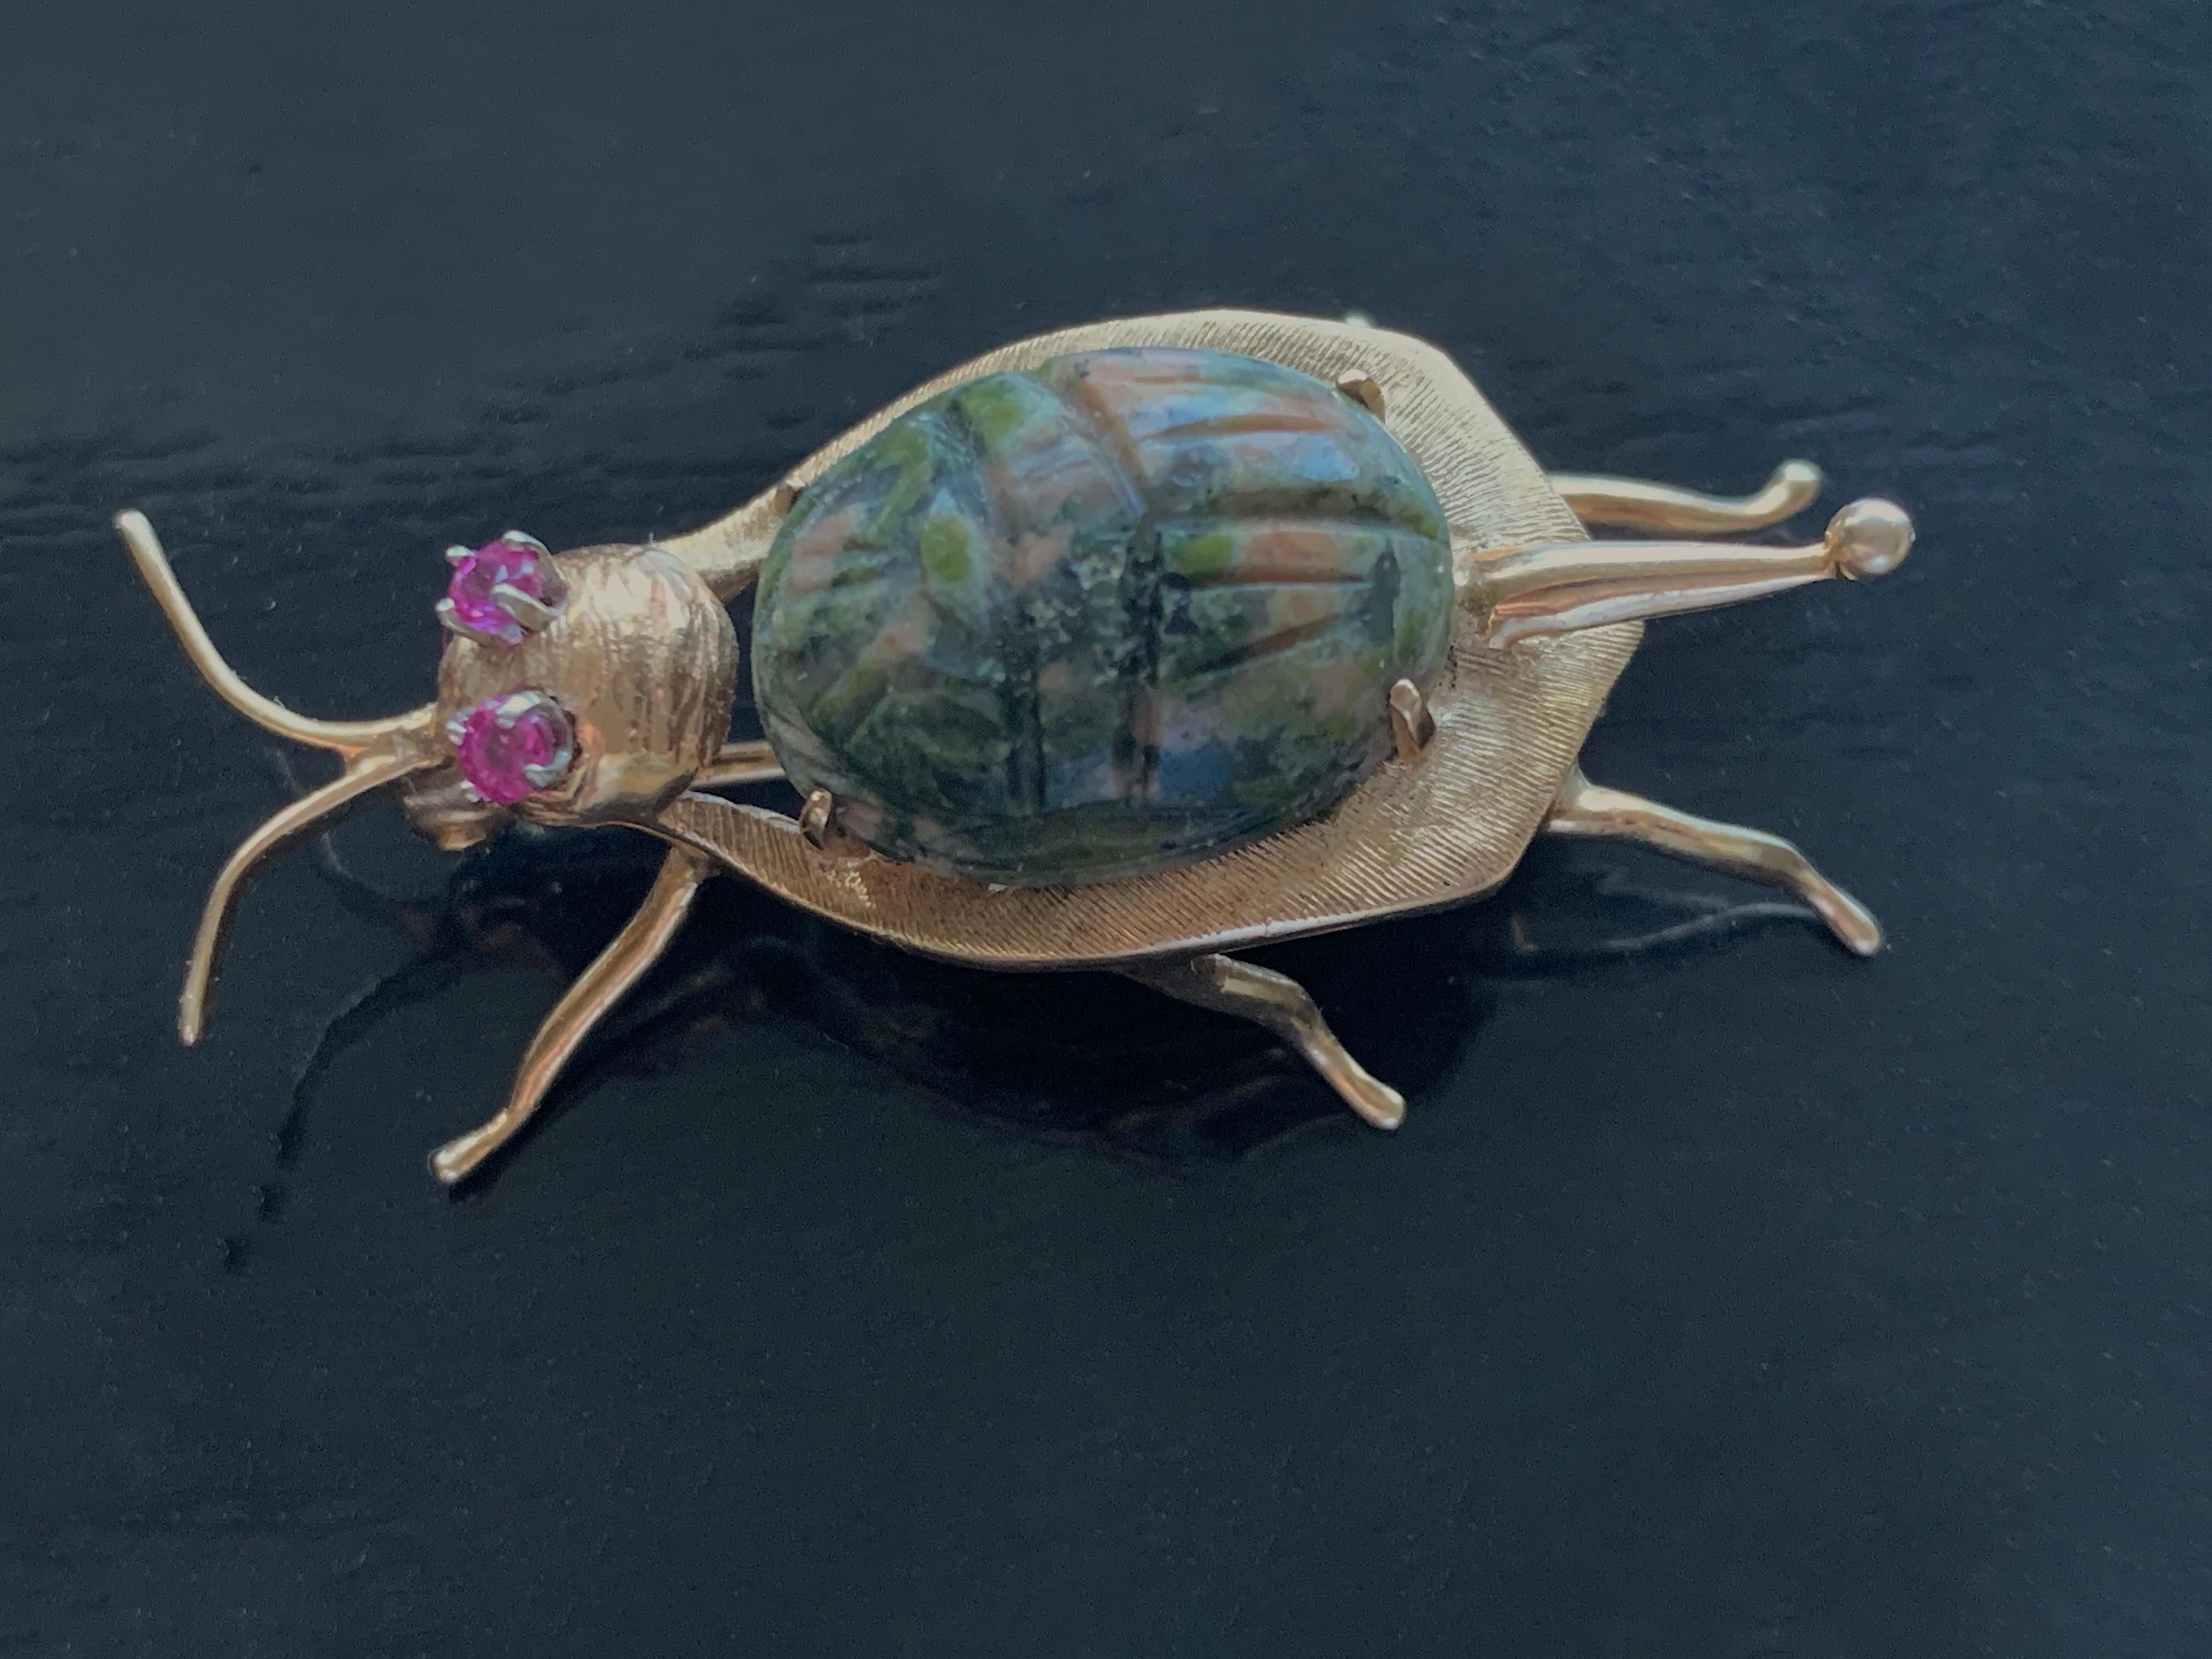 Delightful beetle brooch
created in 14ct Gold 
with pink ruby eyes set in platinum
Beetle  holds a hand carved natural Stone 
which has natural pink , blue & green hues.
Marked 14k & makers stamp on the pin.
fastening is in excellent condition.